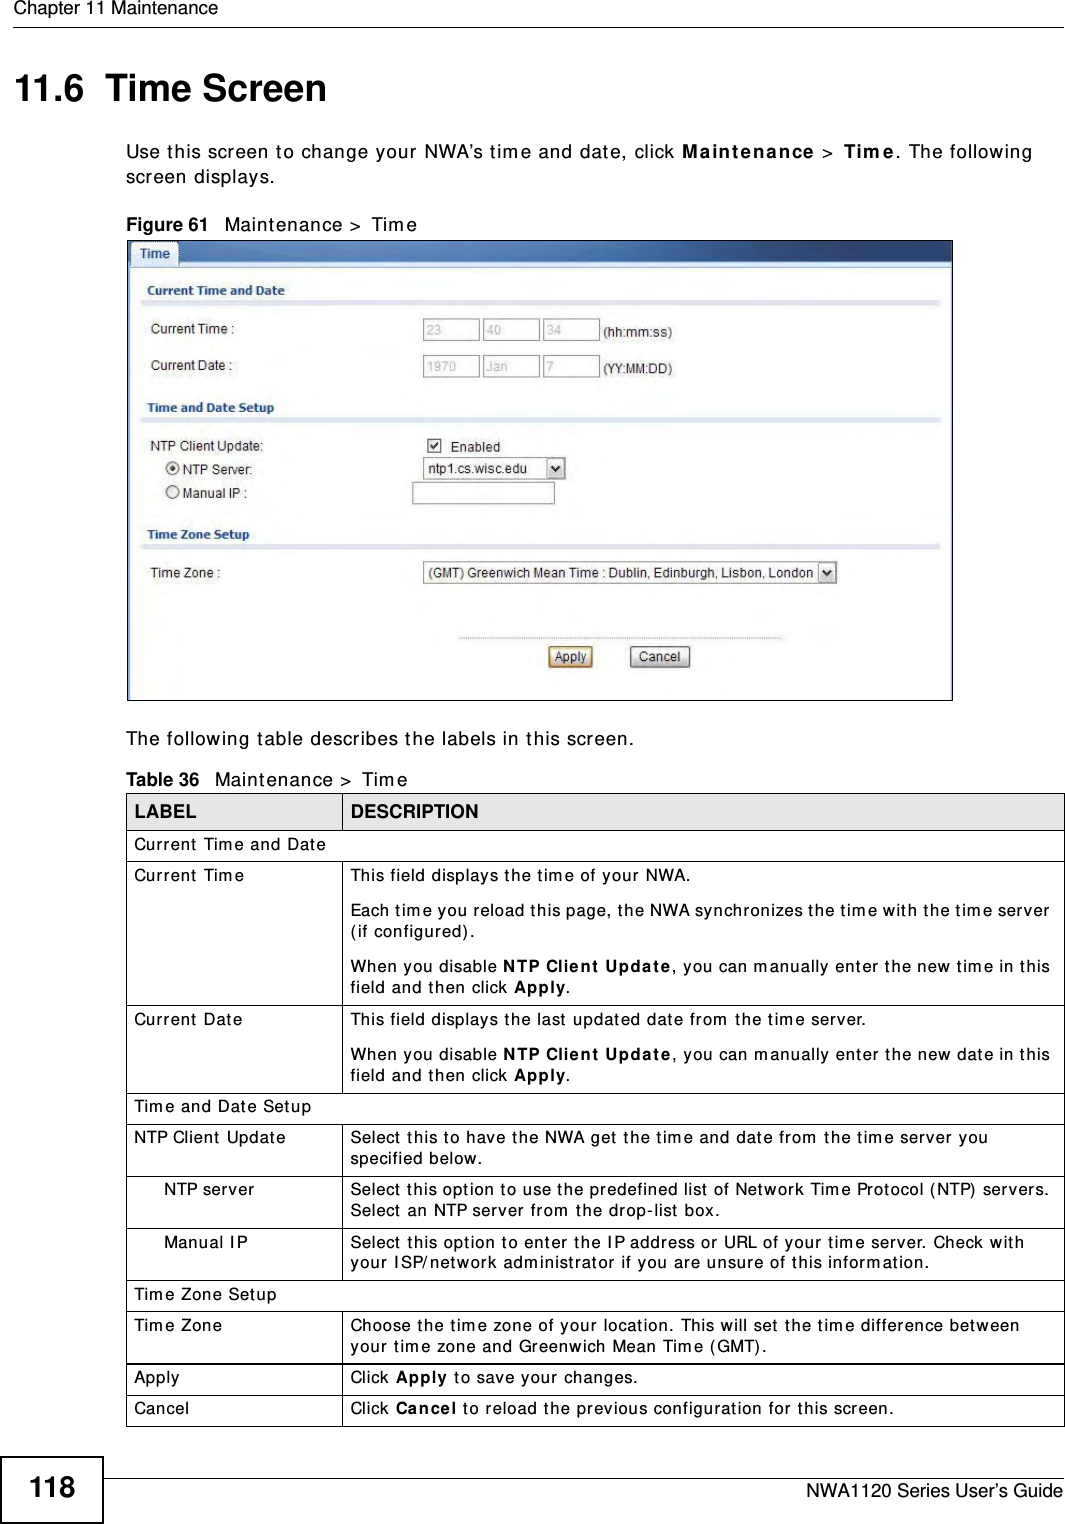 Chapter 11 MaintenanceNWA1120 Series User’s Guide11811.6  Time ScreenUse this screen to change your NWA’s time and date, click Maintenance &gt; Time. The following screen displays.Figure 61   Maintenance &gt; TimeThe following table describes the labels in this screen.Table 36   Maintenance &gt; TimeLABEL DESCRIPTIONCurrent Time and DateCurrent Time This field displays the time of your NWA.Each time you reload this page, the NWA synchronizes the time with the time server (if configured).When you disable NTP Client Update, you can manually enter the new time in this field and then click Apply. Current Date This field displays the last updated date from the time server.When you disable NTP Client Update, you can manually enter the new date in this field and then click Apply. Time and Date SetupNTP Client Update Select this to have the NWA get the time and date from the time server you specified below.NTP server Select this option to use the predefined list of Network Time Protocol (NTP) servers. Select an NTP server from the drop-list box.Manual IP Select this option to enter the IP address or URL of your time server. Check with your ISP/network administrator if you are unsure of this information.Time Zone SetupTime Zone Choose the time zone of your location. This will set the time difference between your time zone and Greenwich Mean Time (GMT). Apply Click Apply to save your changes.Cancel Click Cancel to reload the previous configuration for this screen.